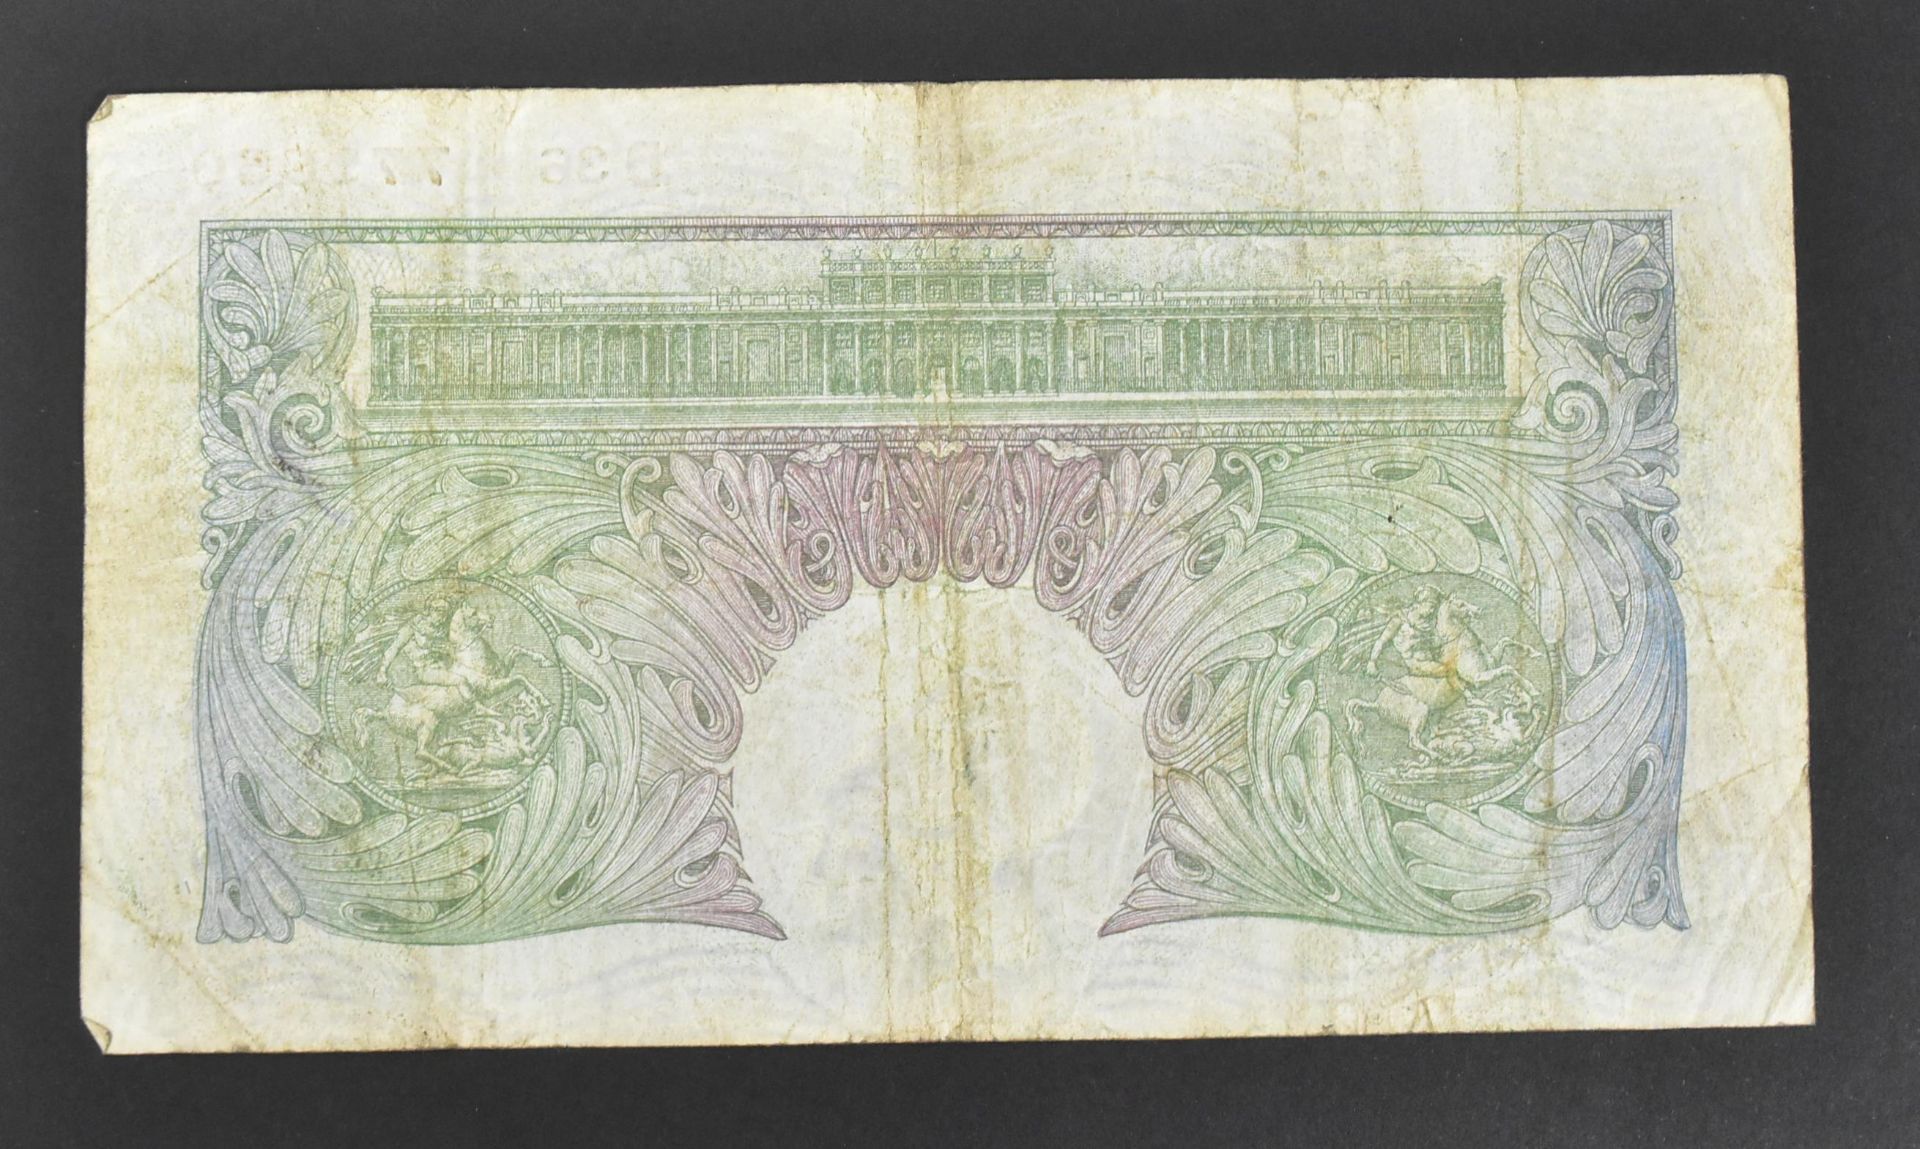 COLLECTION BRITISH UNCIRCULATED BANK NOTES - Image 29 of 61